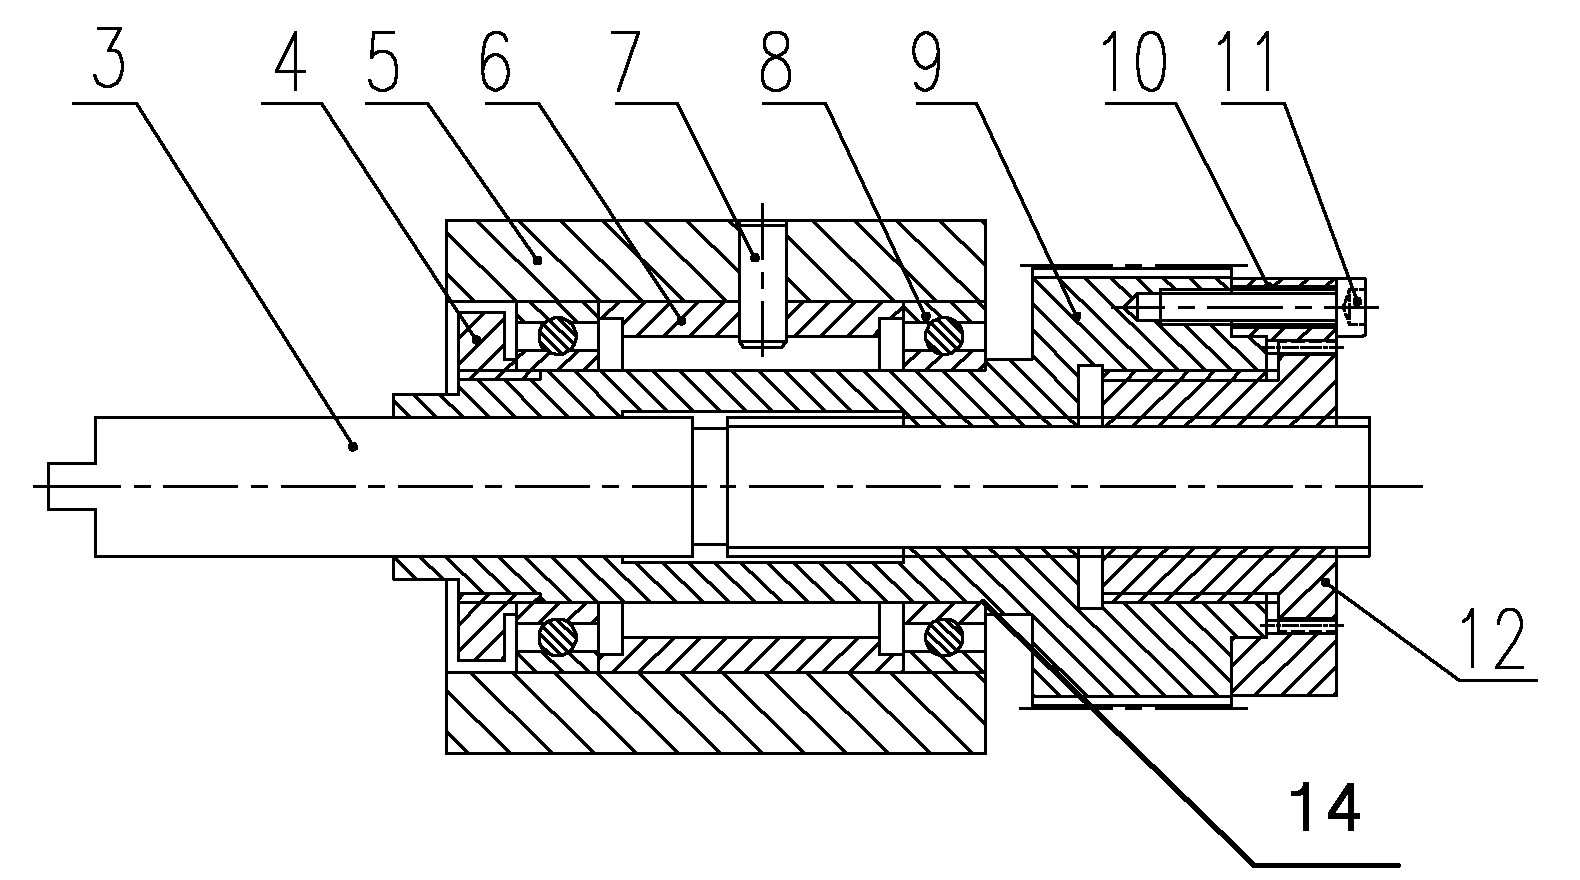 Transmission device of precise displacement actuator